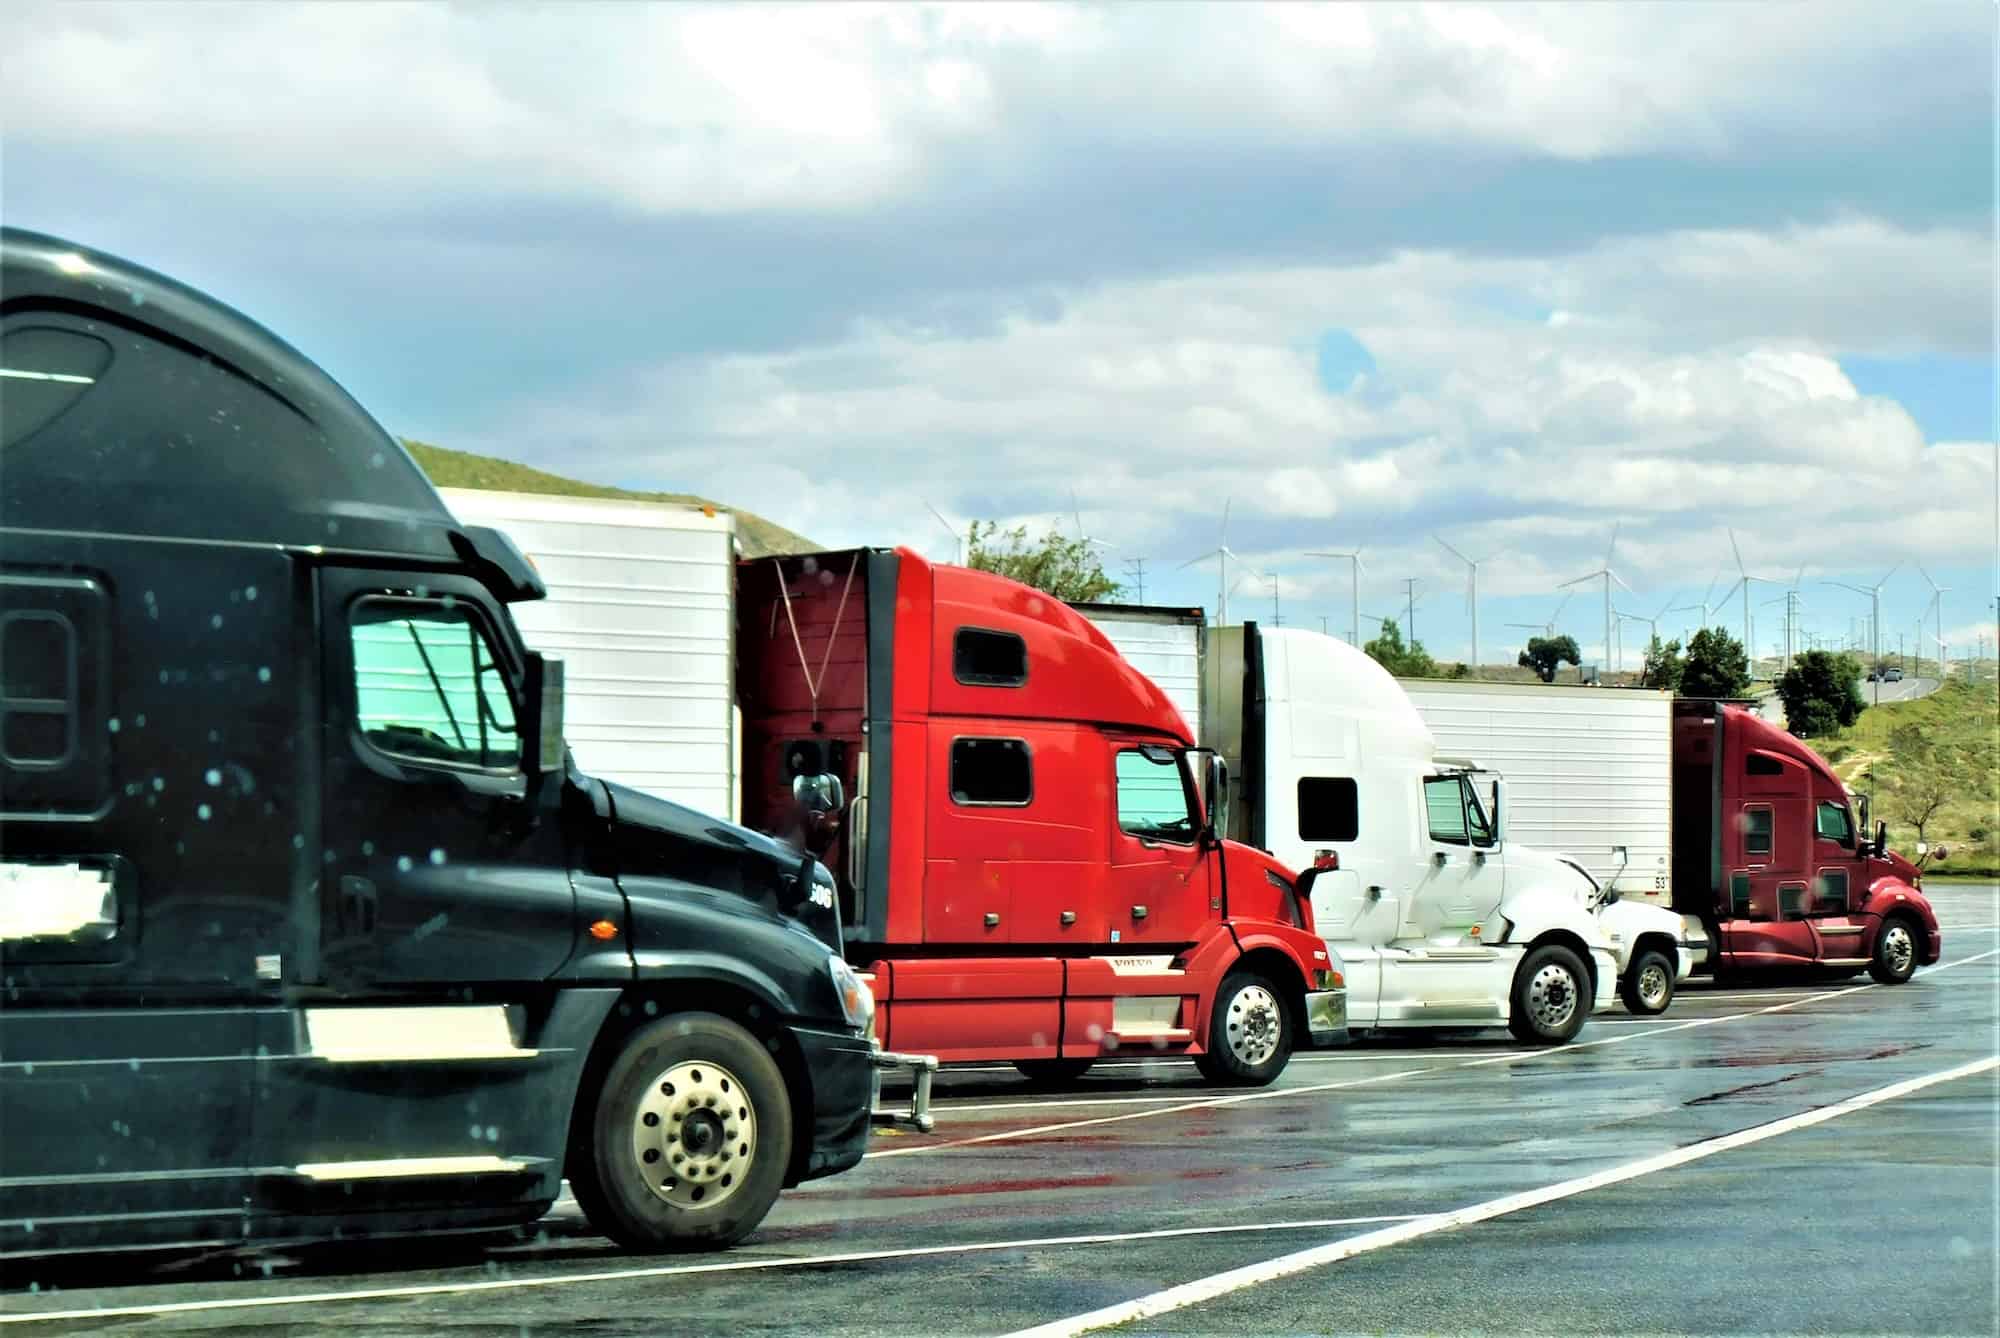 Truck Accident Injuries: Understanding the Range and Severity - The Razavi Law Group, Santa Ana, CA